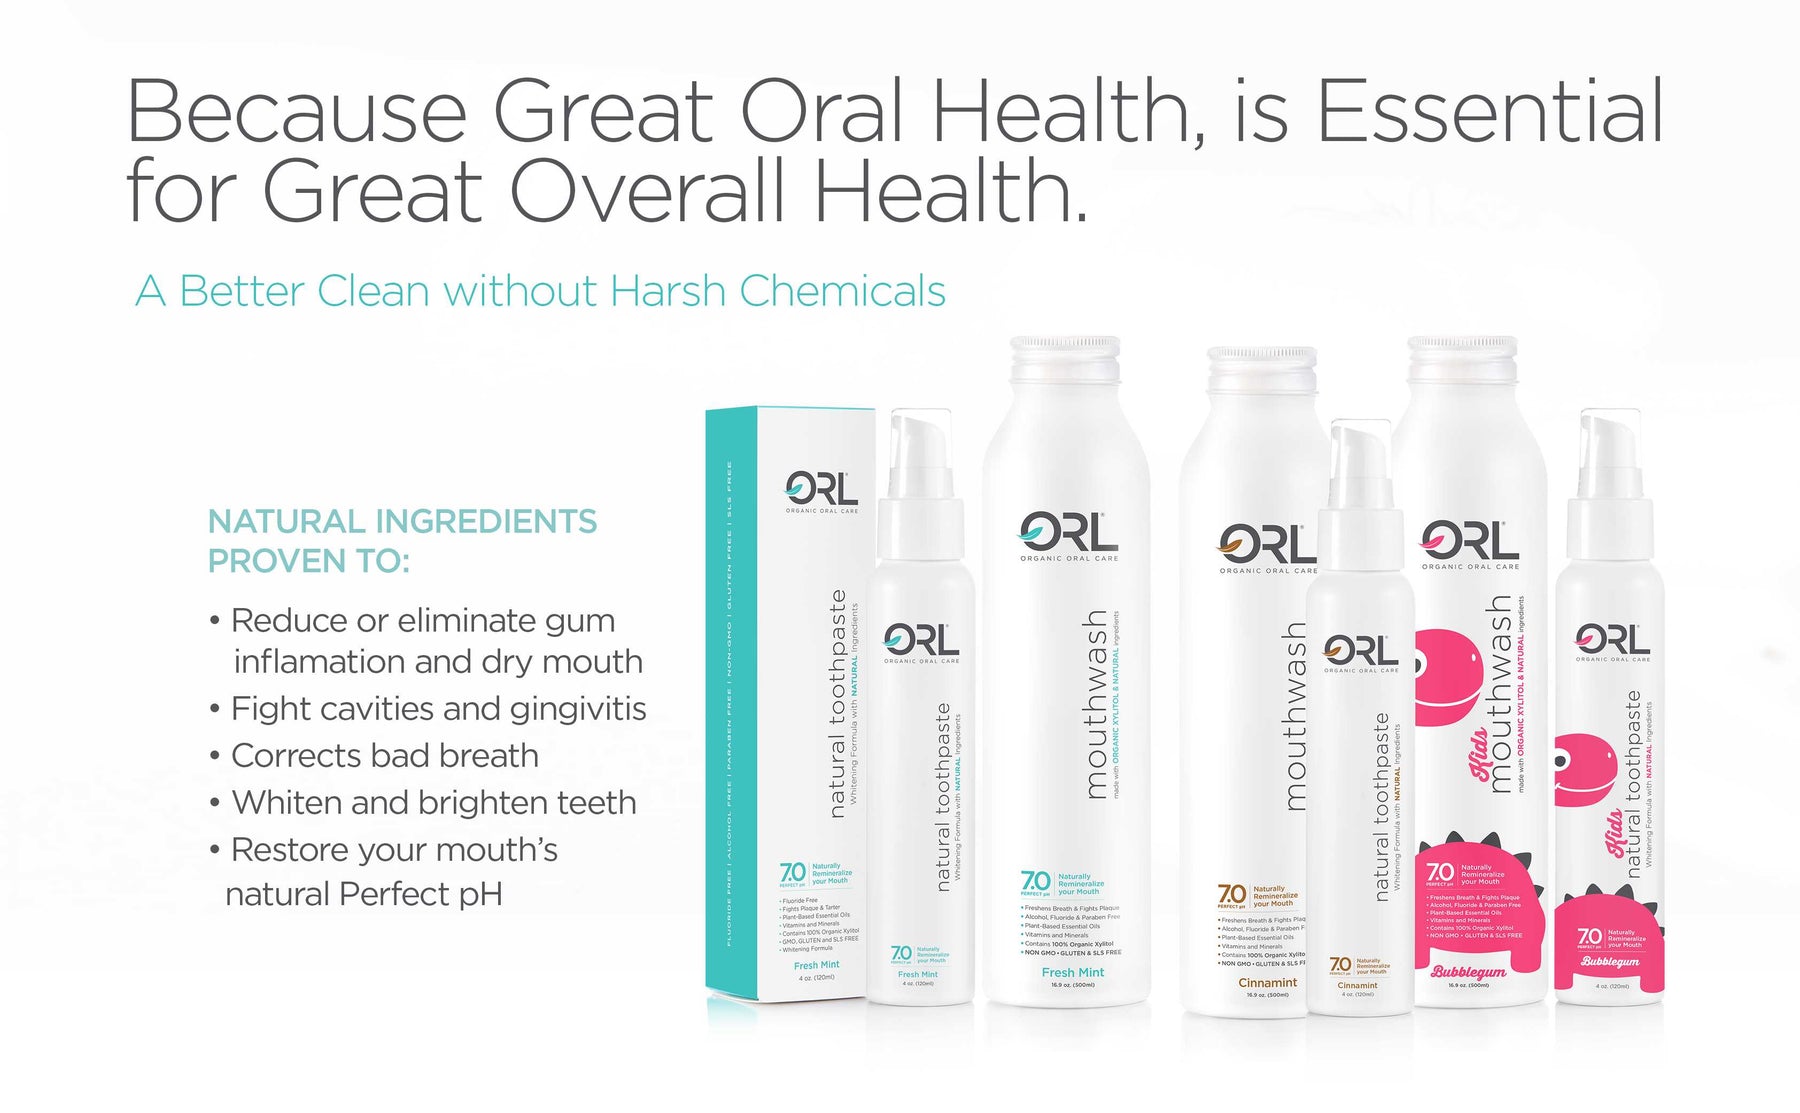 Special Offer! - Buy 2 Get 1 Free Fluoride Free Organic & Natural Toothpaste with Hydroxyapatite ORL LABS